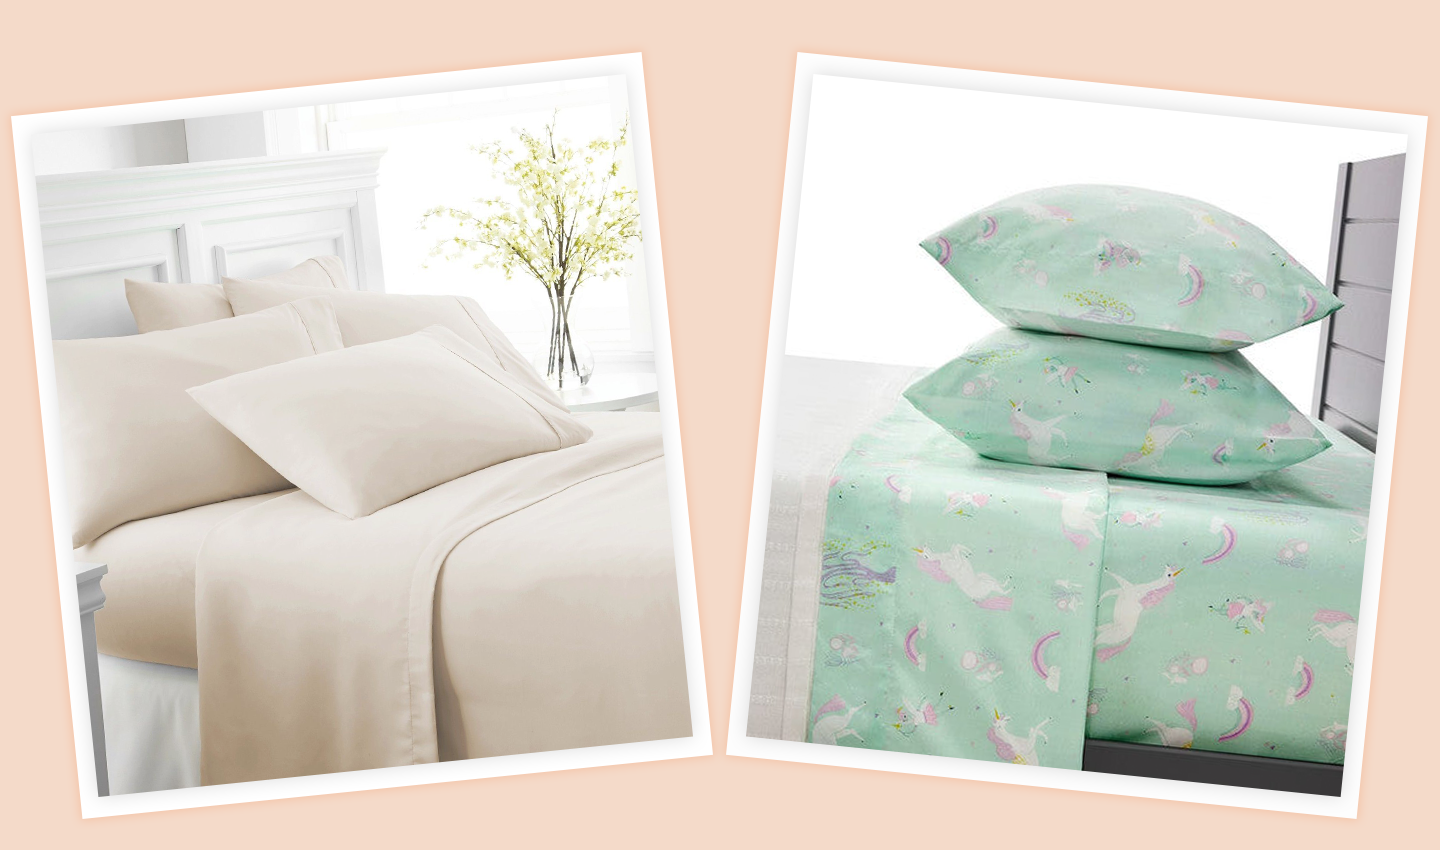 Cotton vs. Microfiber Sheets: Which is Better?